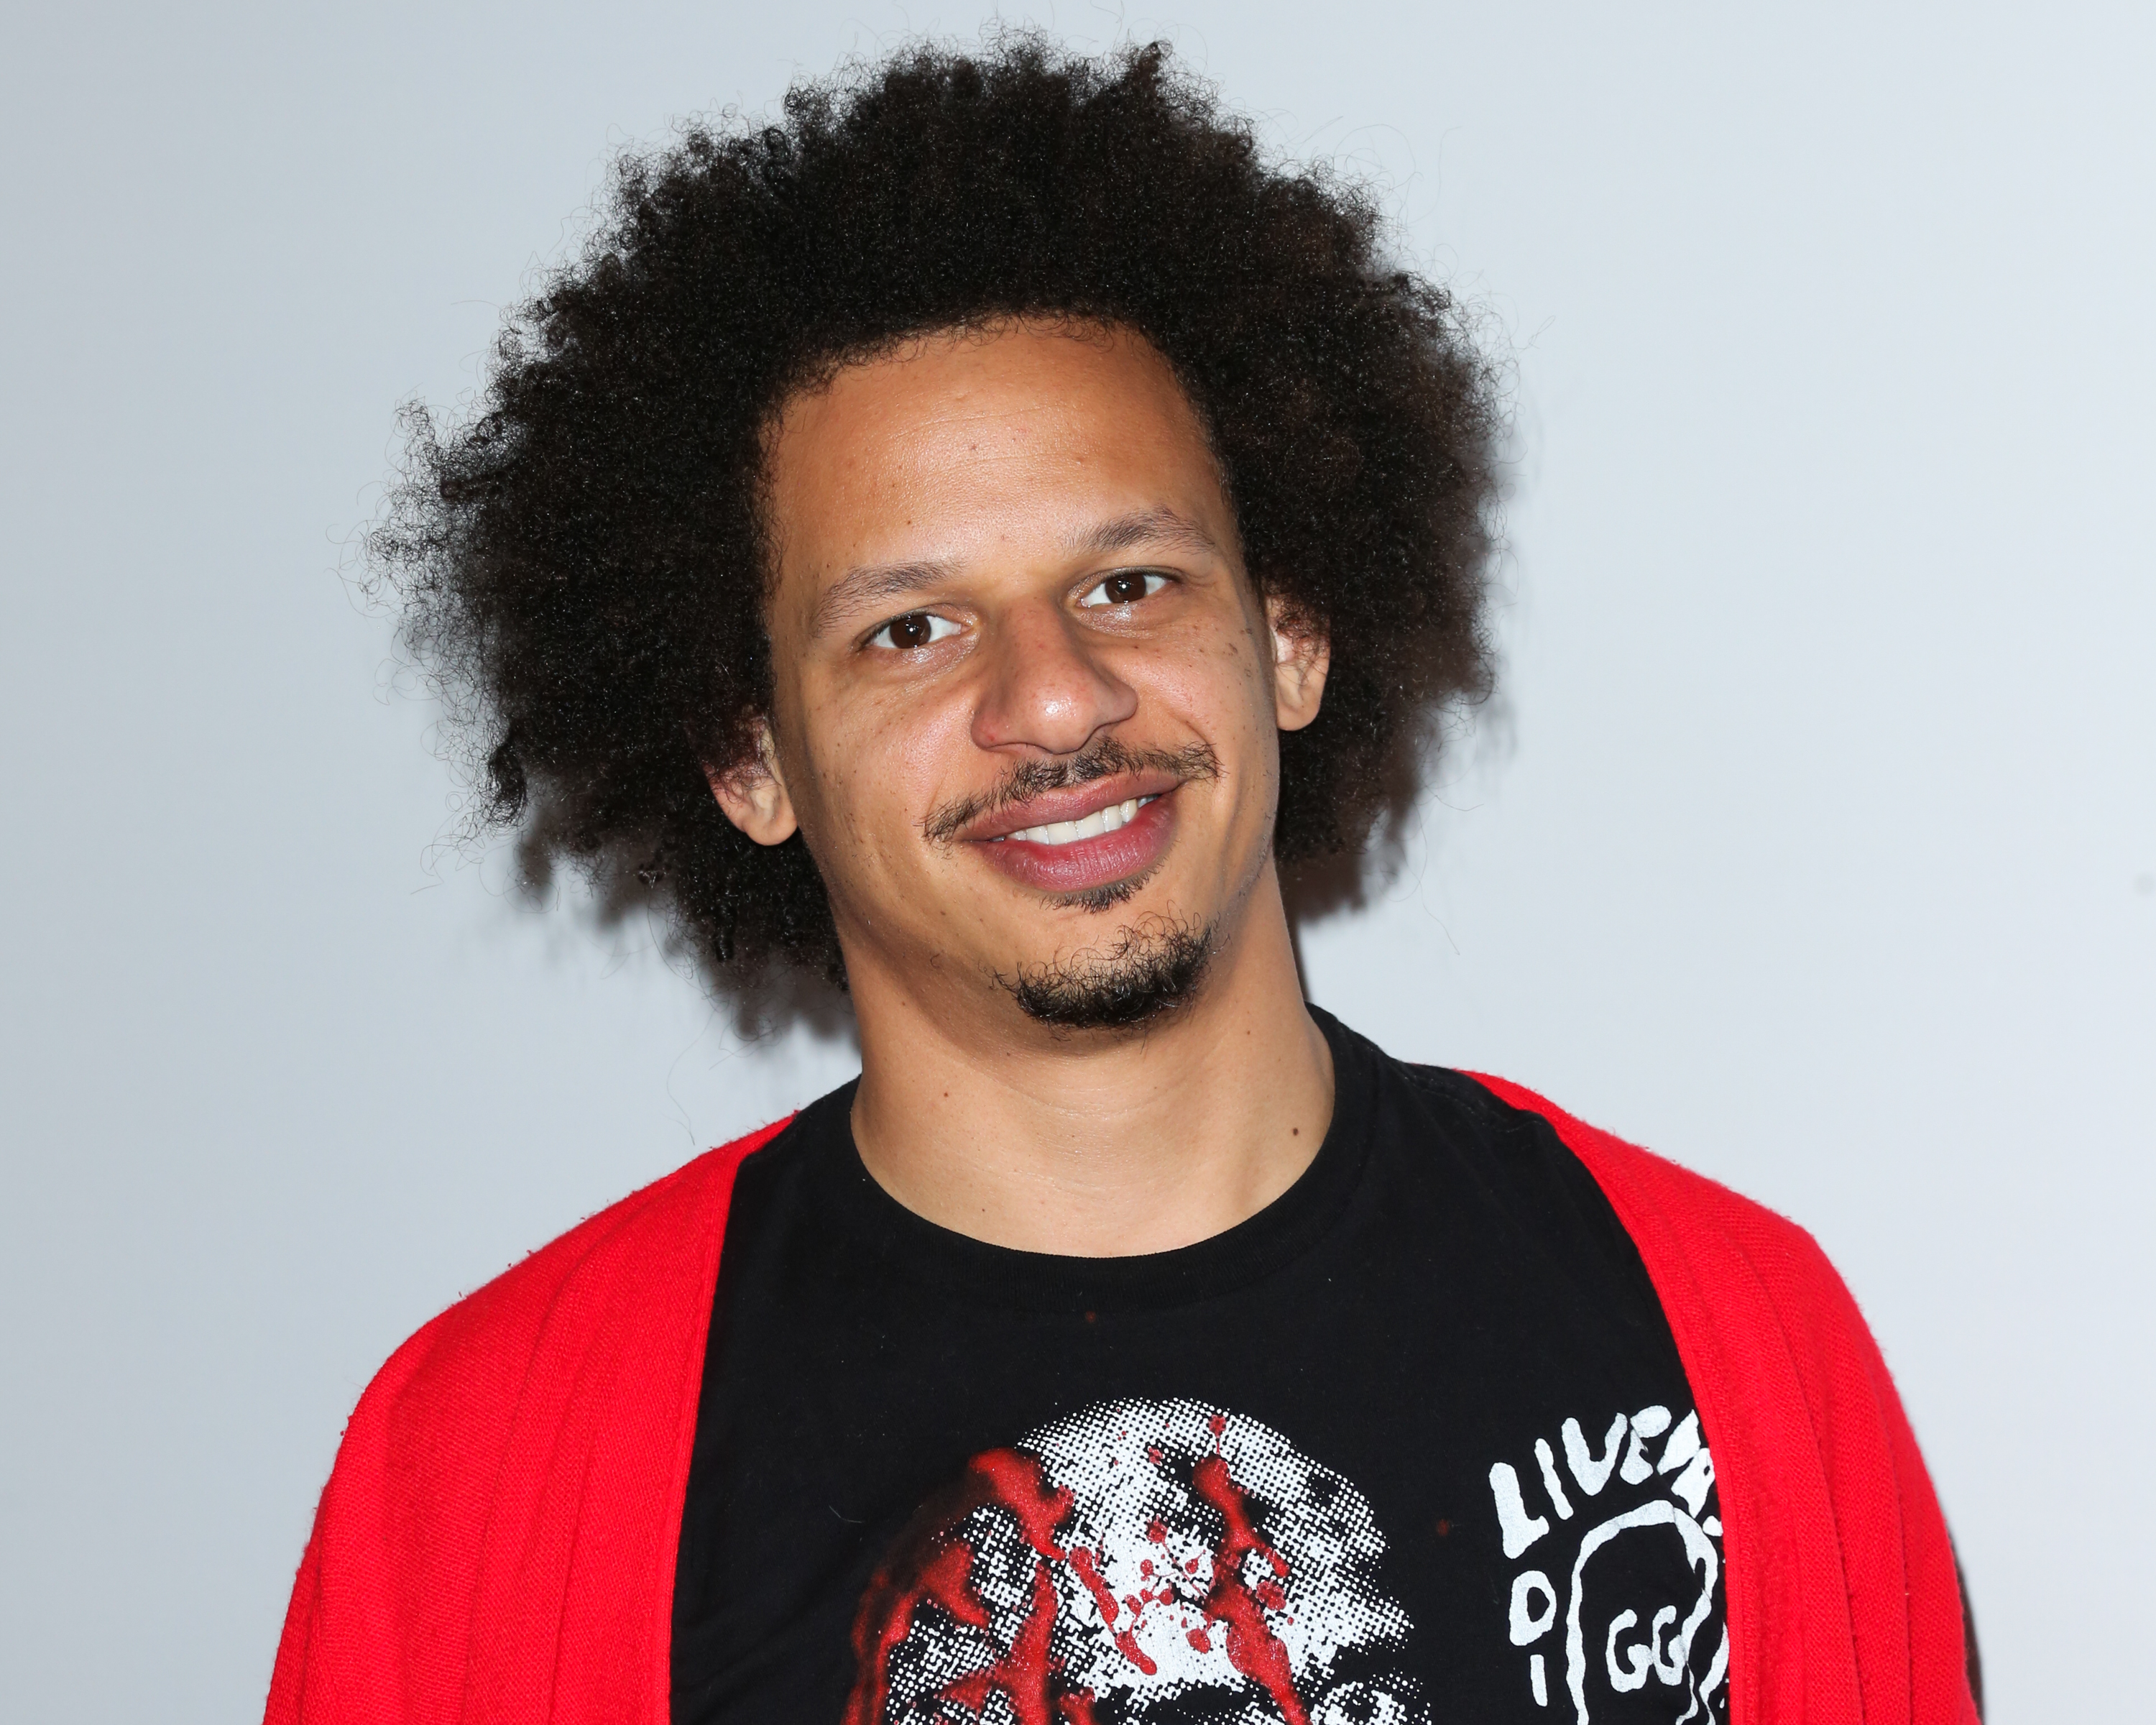 Eric Andre on the chaos of 'The Eric Andre Show': 'I just want to express myself' - National | Globalnews.ca